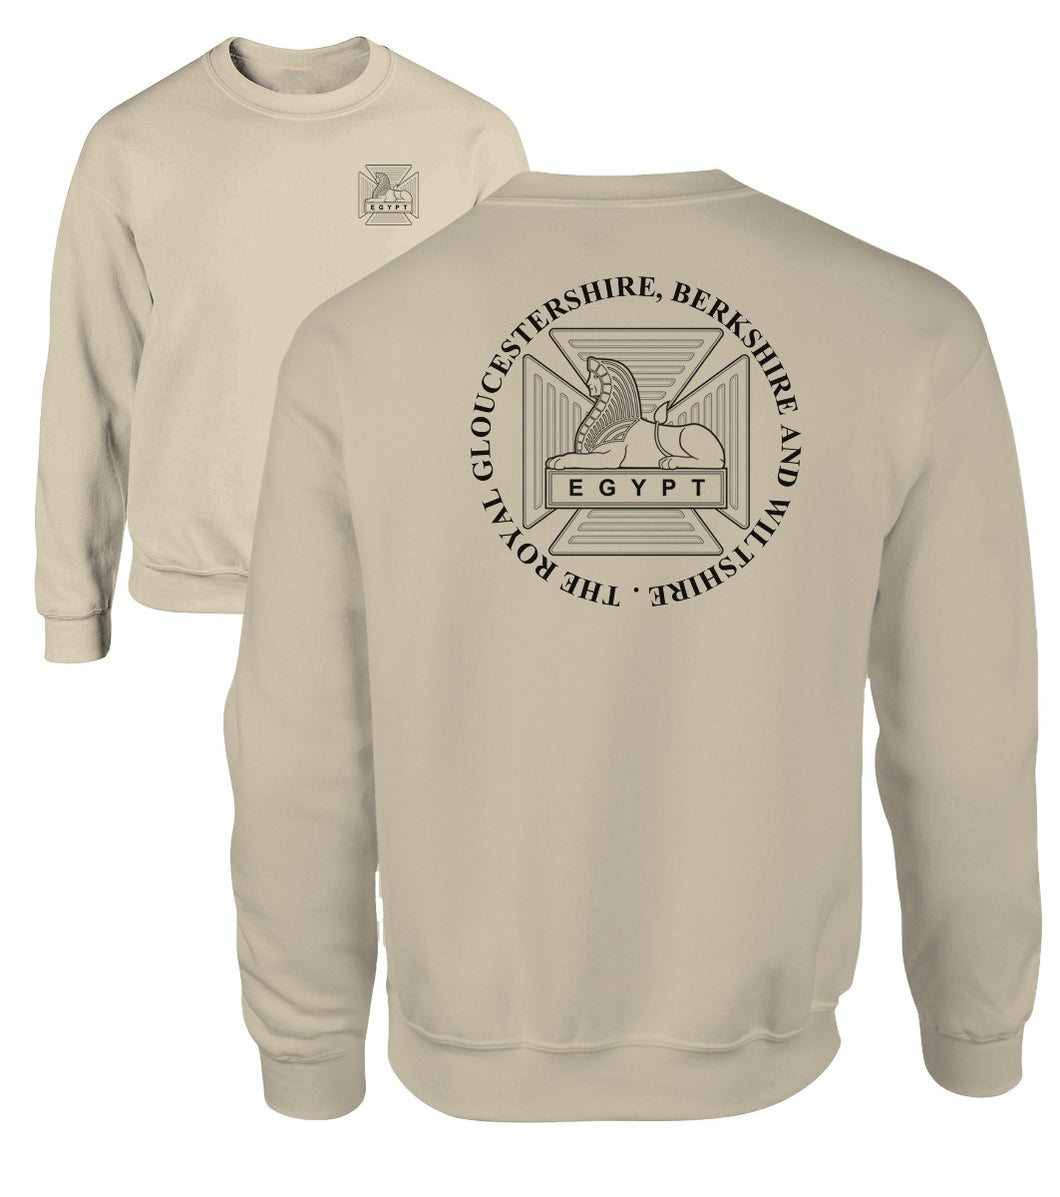 Double Printed Royal Gloucestershire Berkshire and Wiltshire (RGBW) Sweatshirt